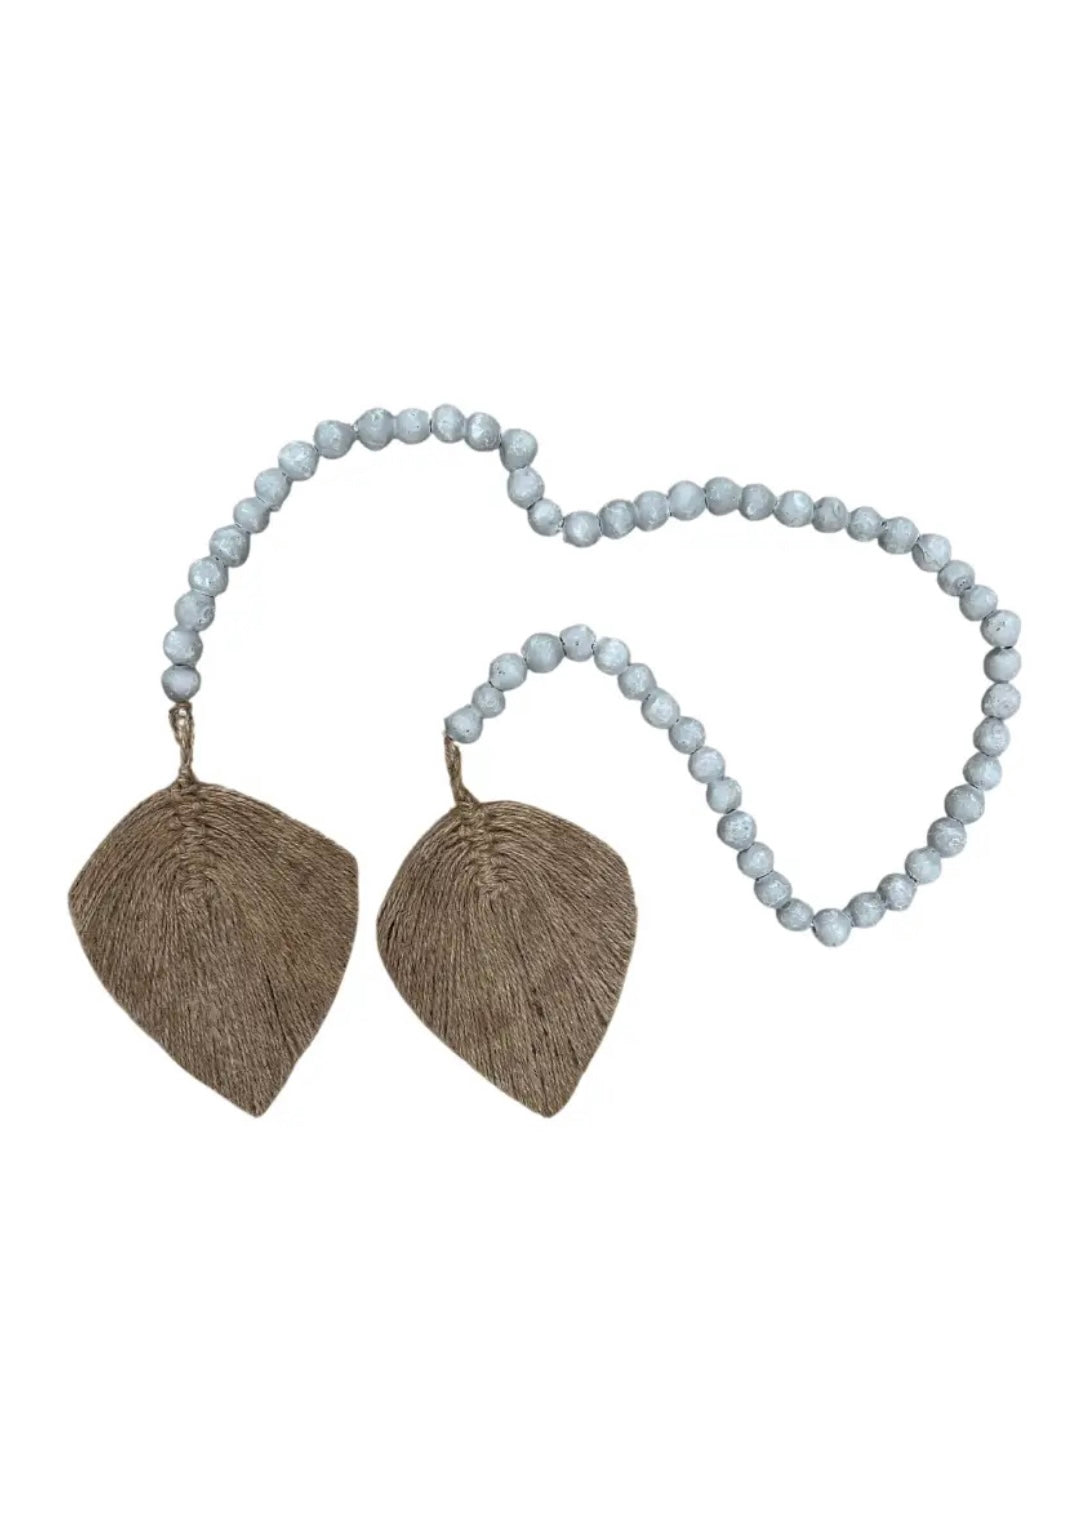 Bead Garland w/Twine Woven Leaves - Gray